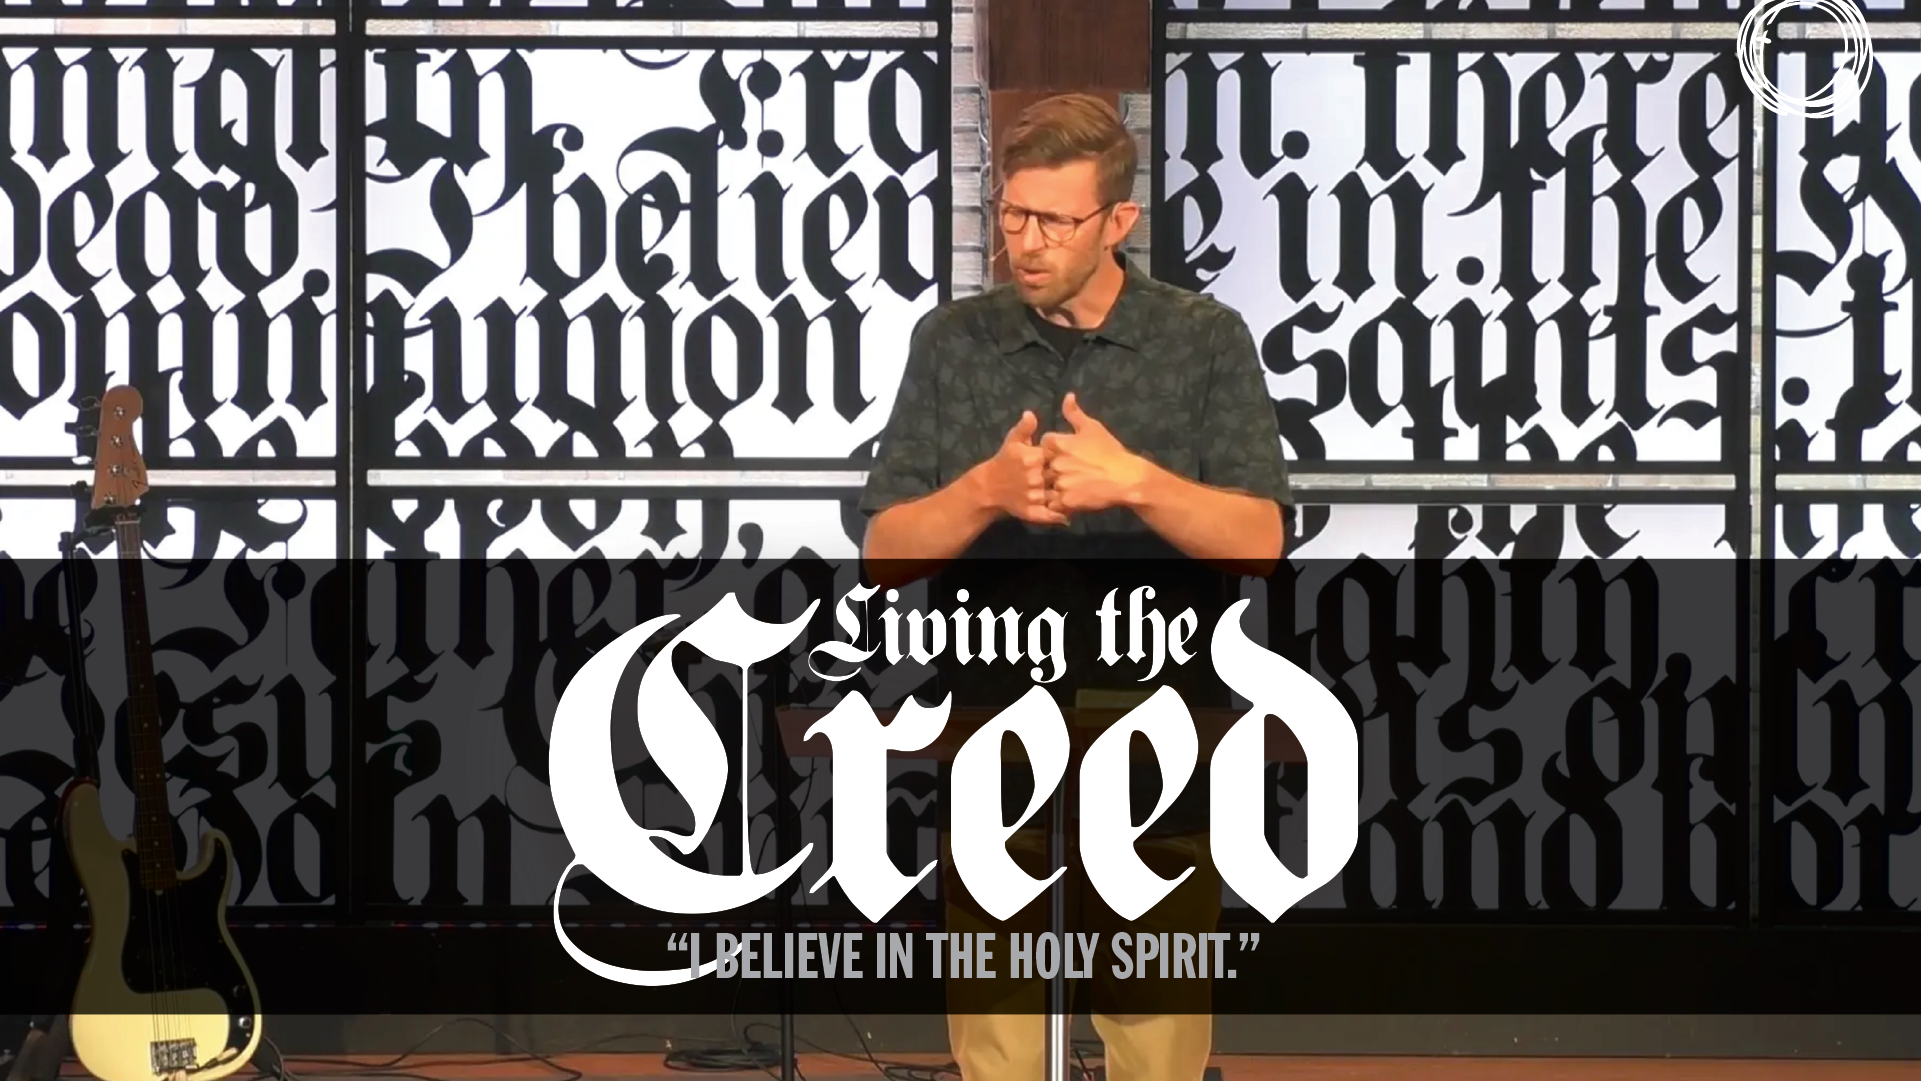 "I believe in the Holy Spirit."